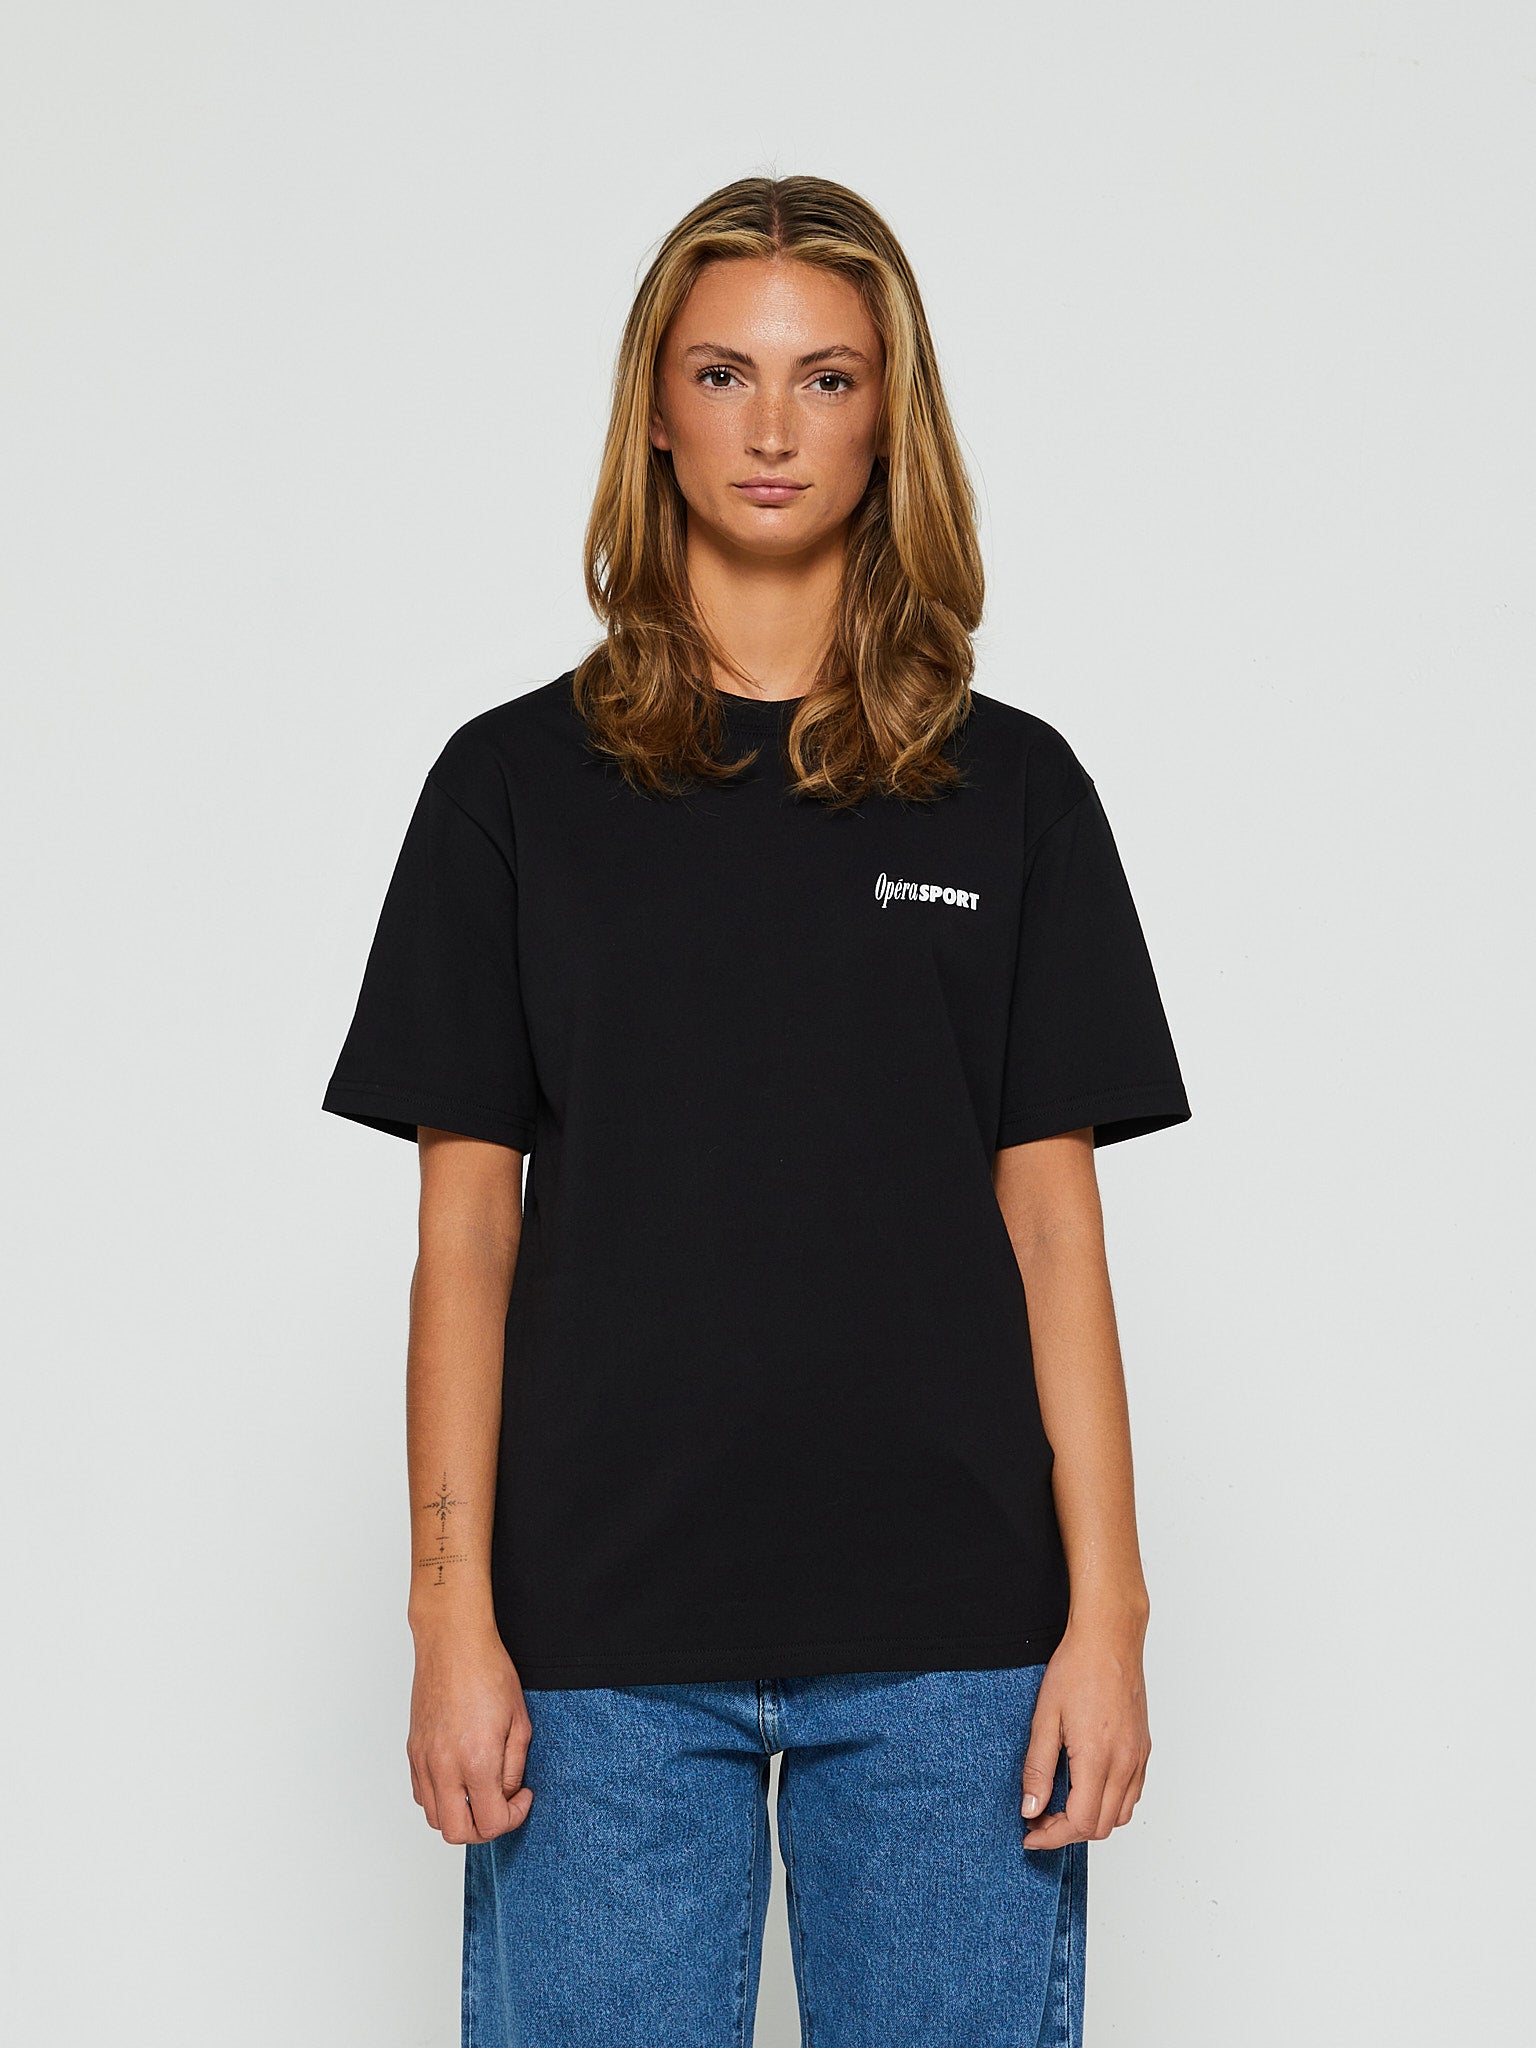 Opéra Sport - Claude T-Shirt in Black – stoy